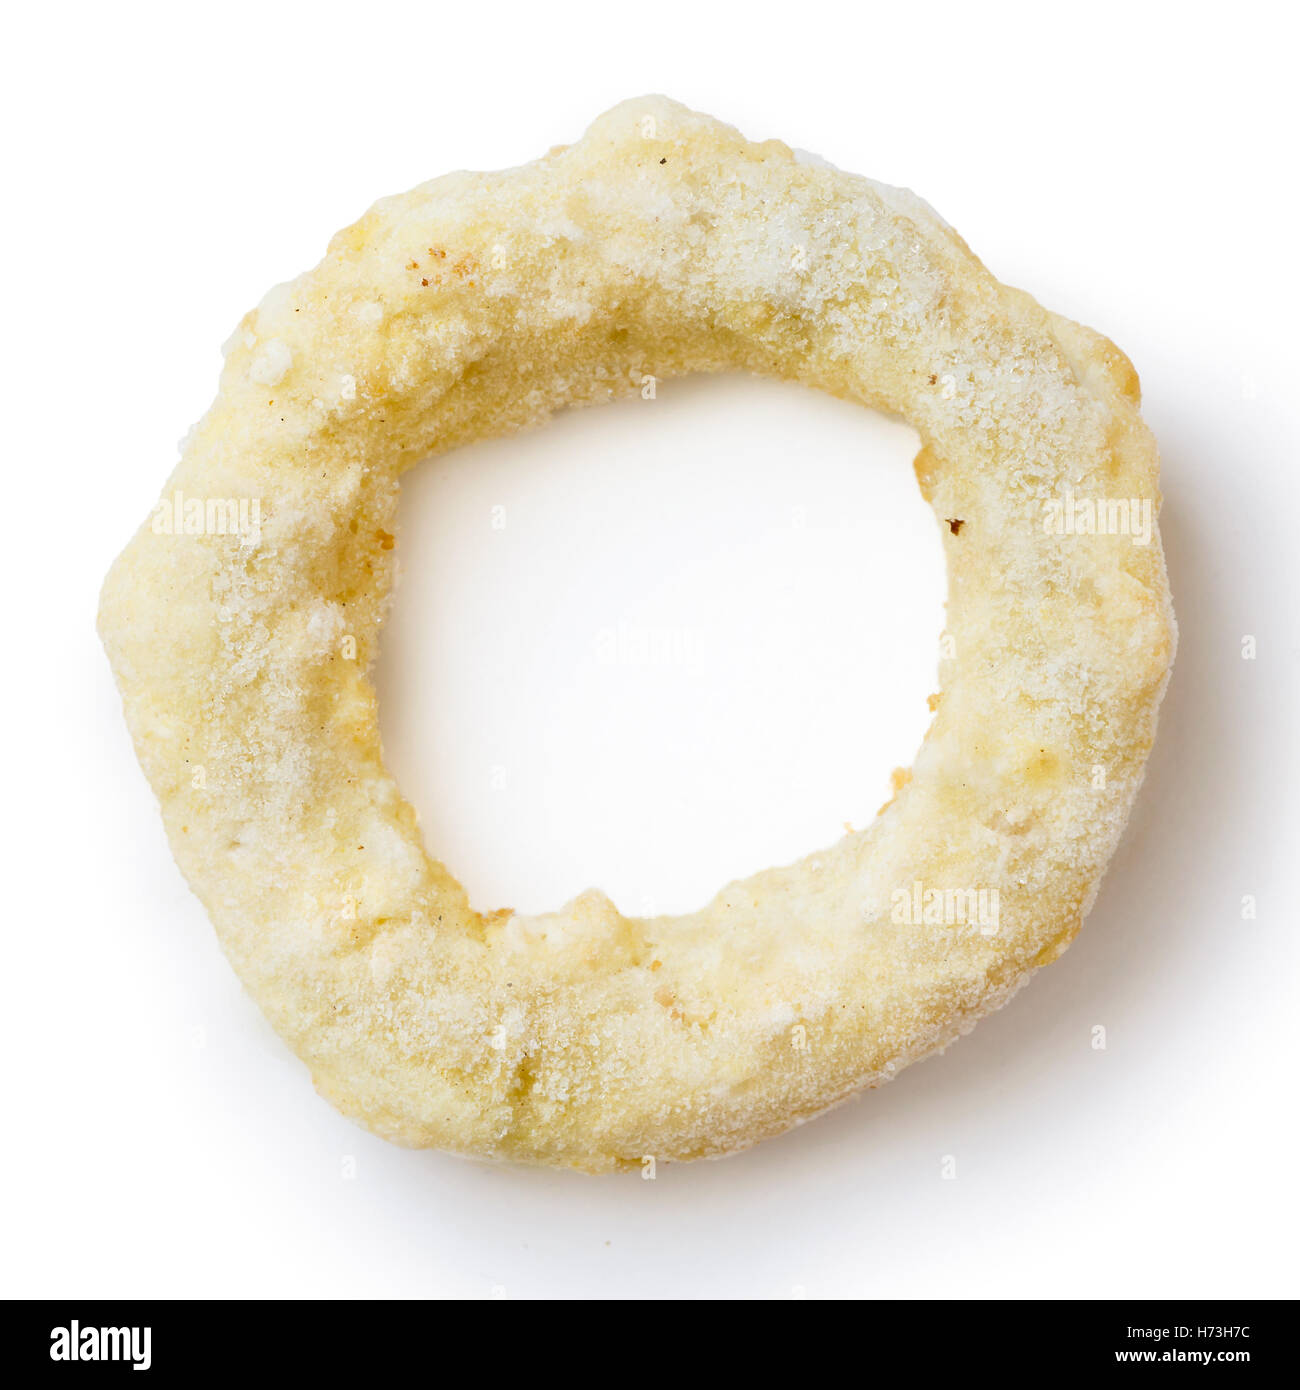 Single frozen battered onion or calamari ring isolated on white from above. Stock Photo